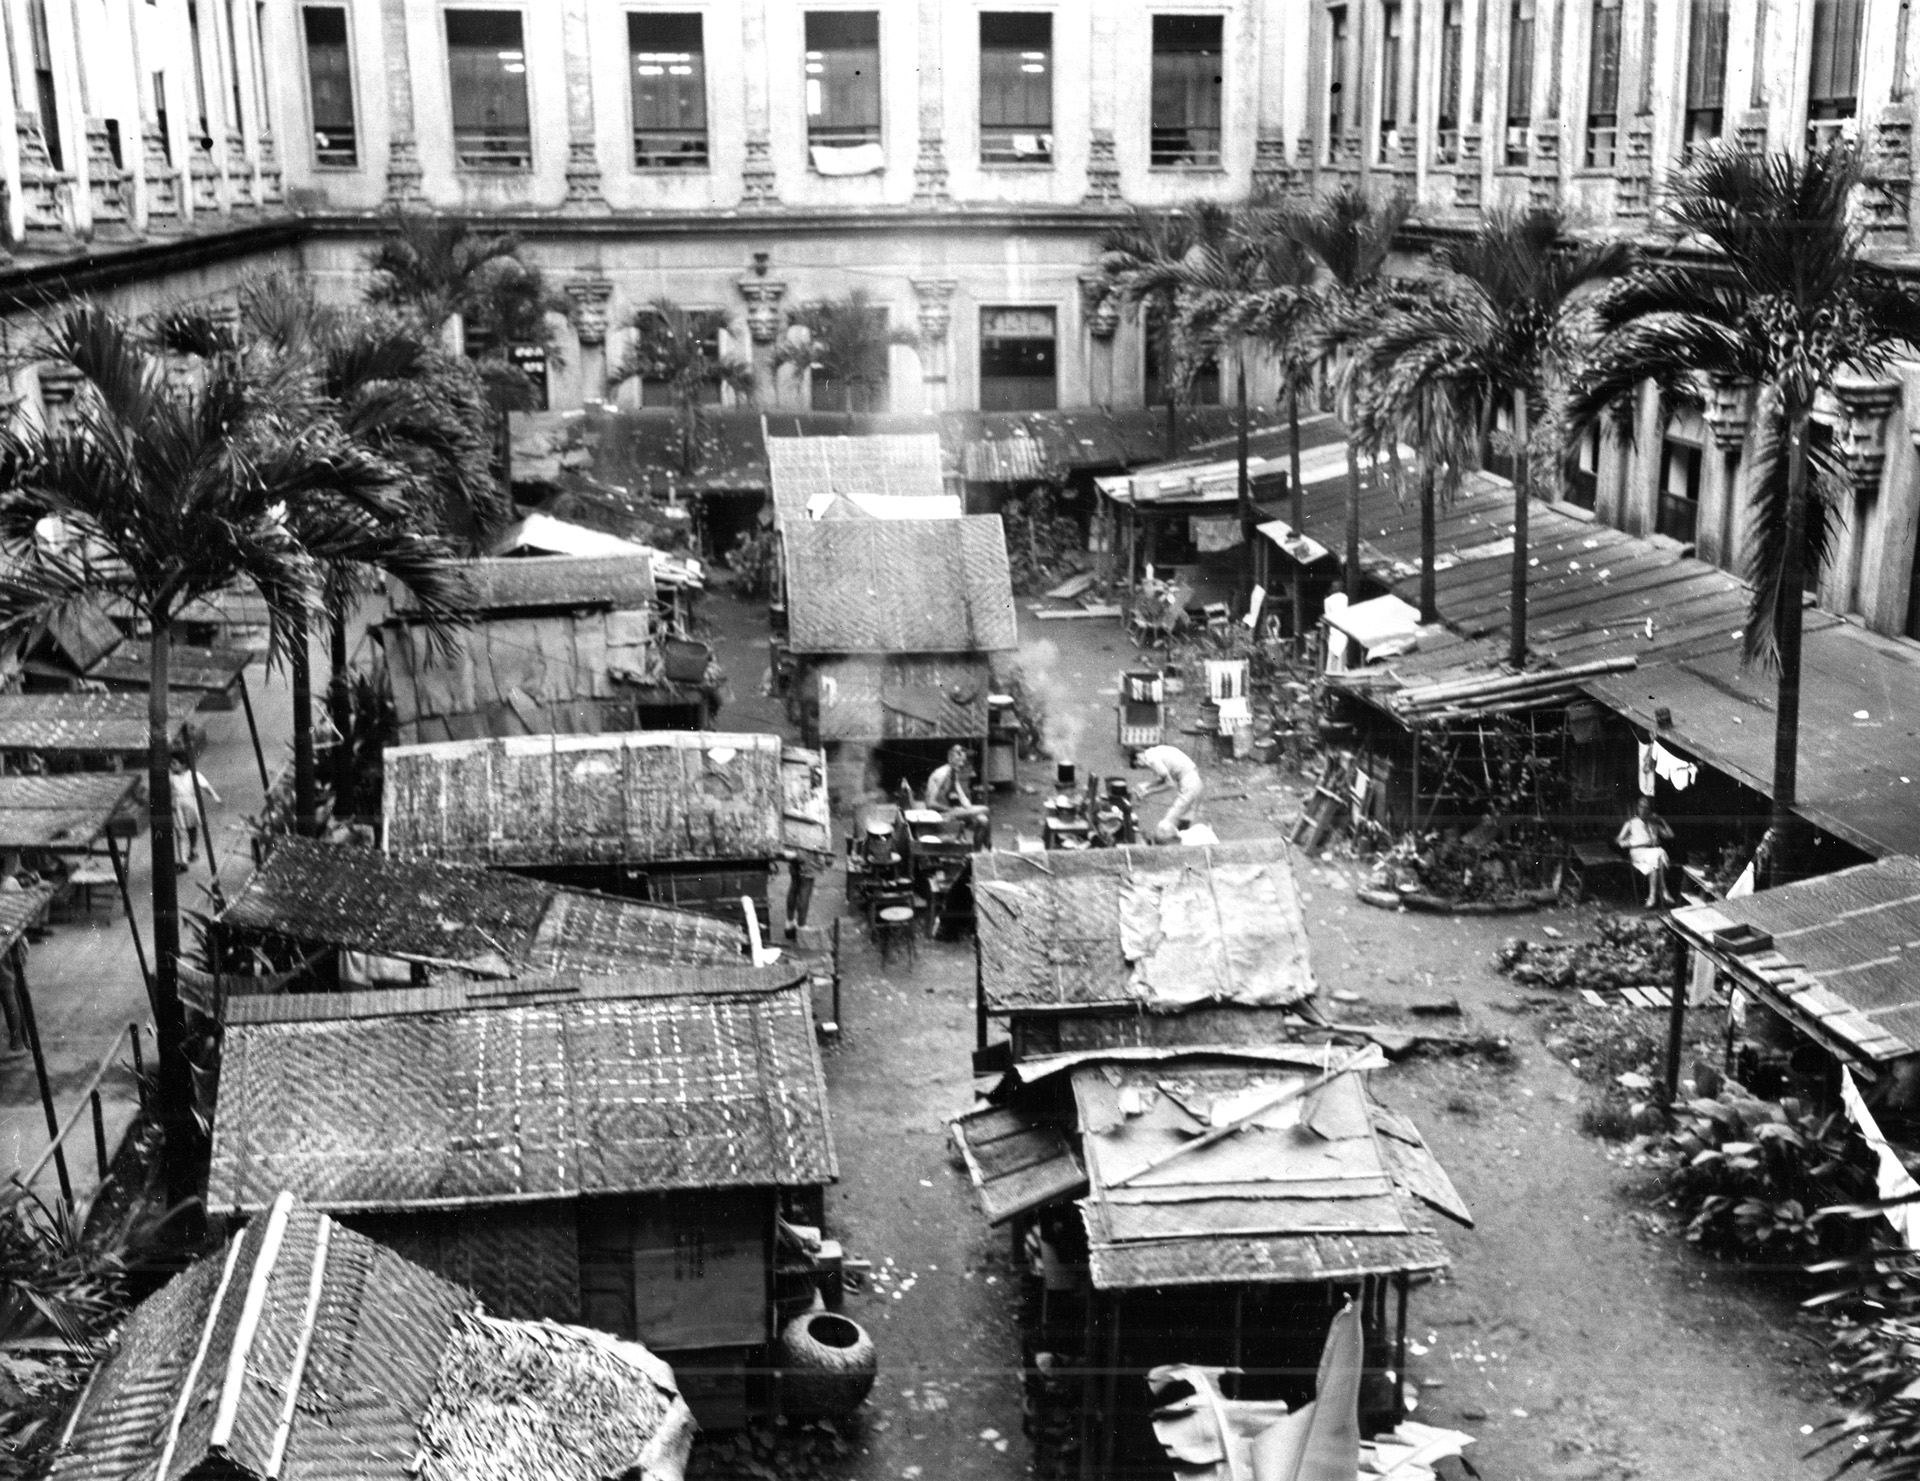 A once beautiful courtyard on the grounds of Santo Tomas University has been turned into a dismal cluster of residential shacks by internees who suffered nearly three years of privations under Japanese rule. 